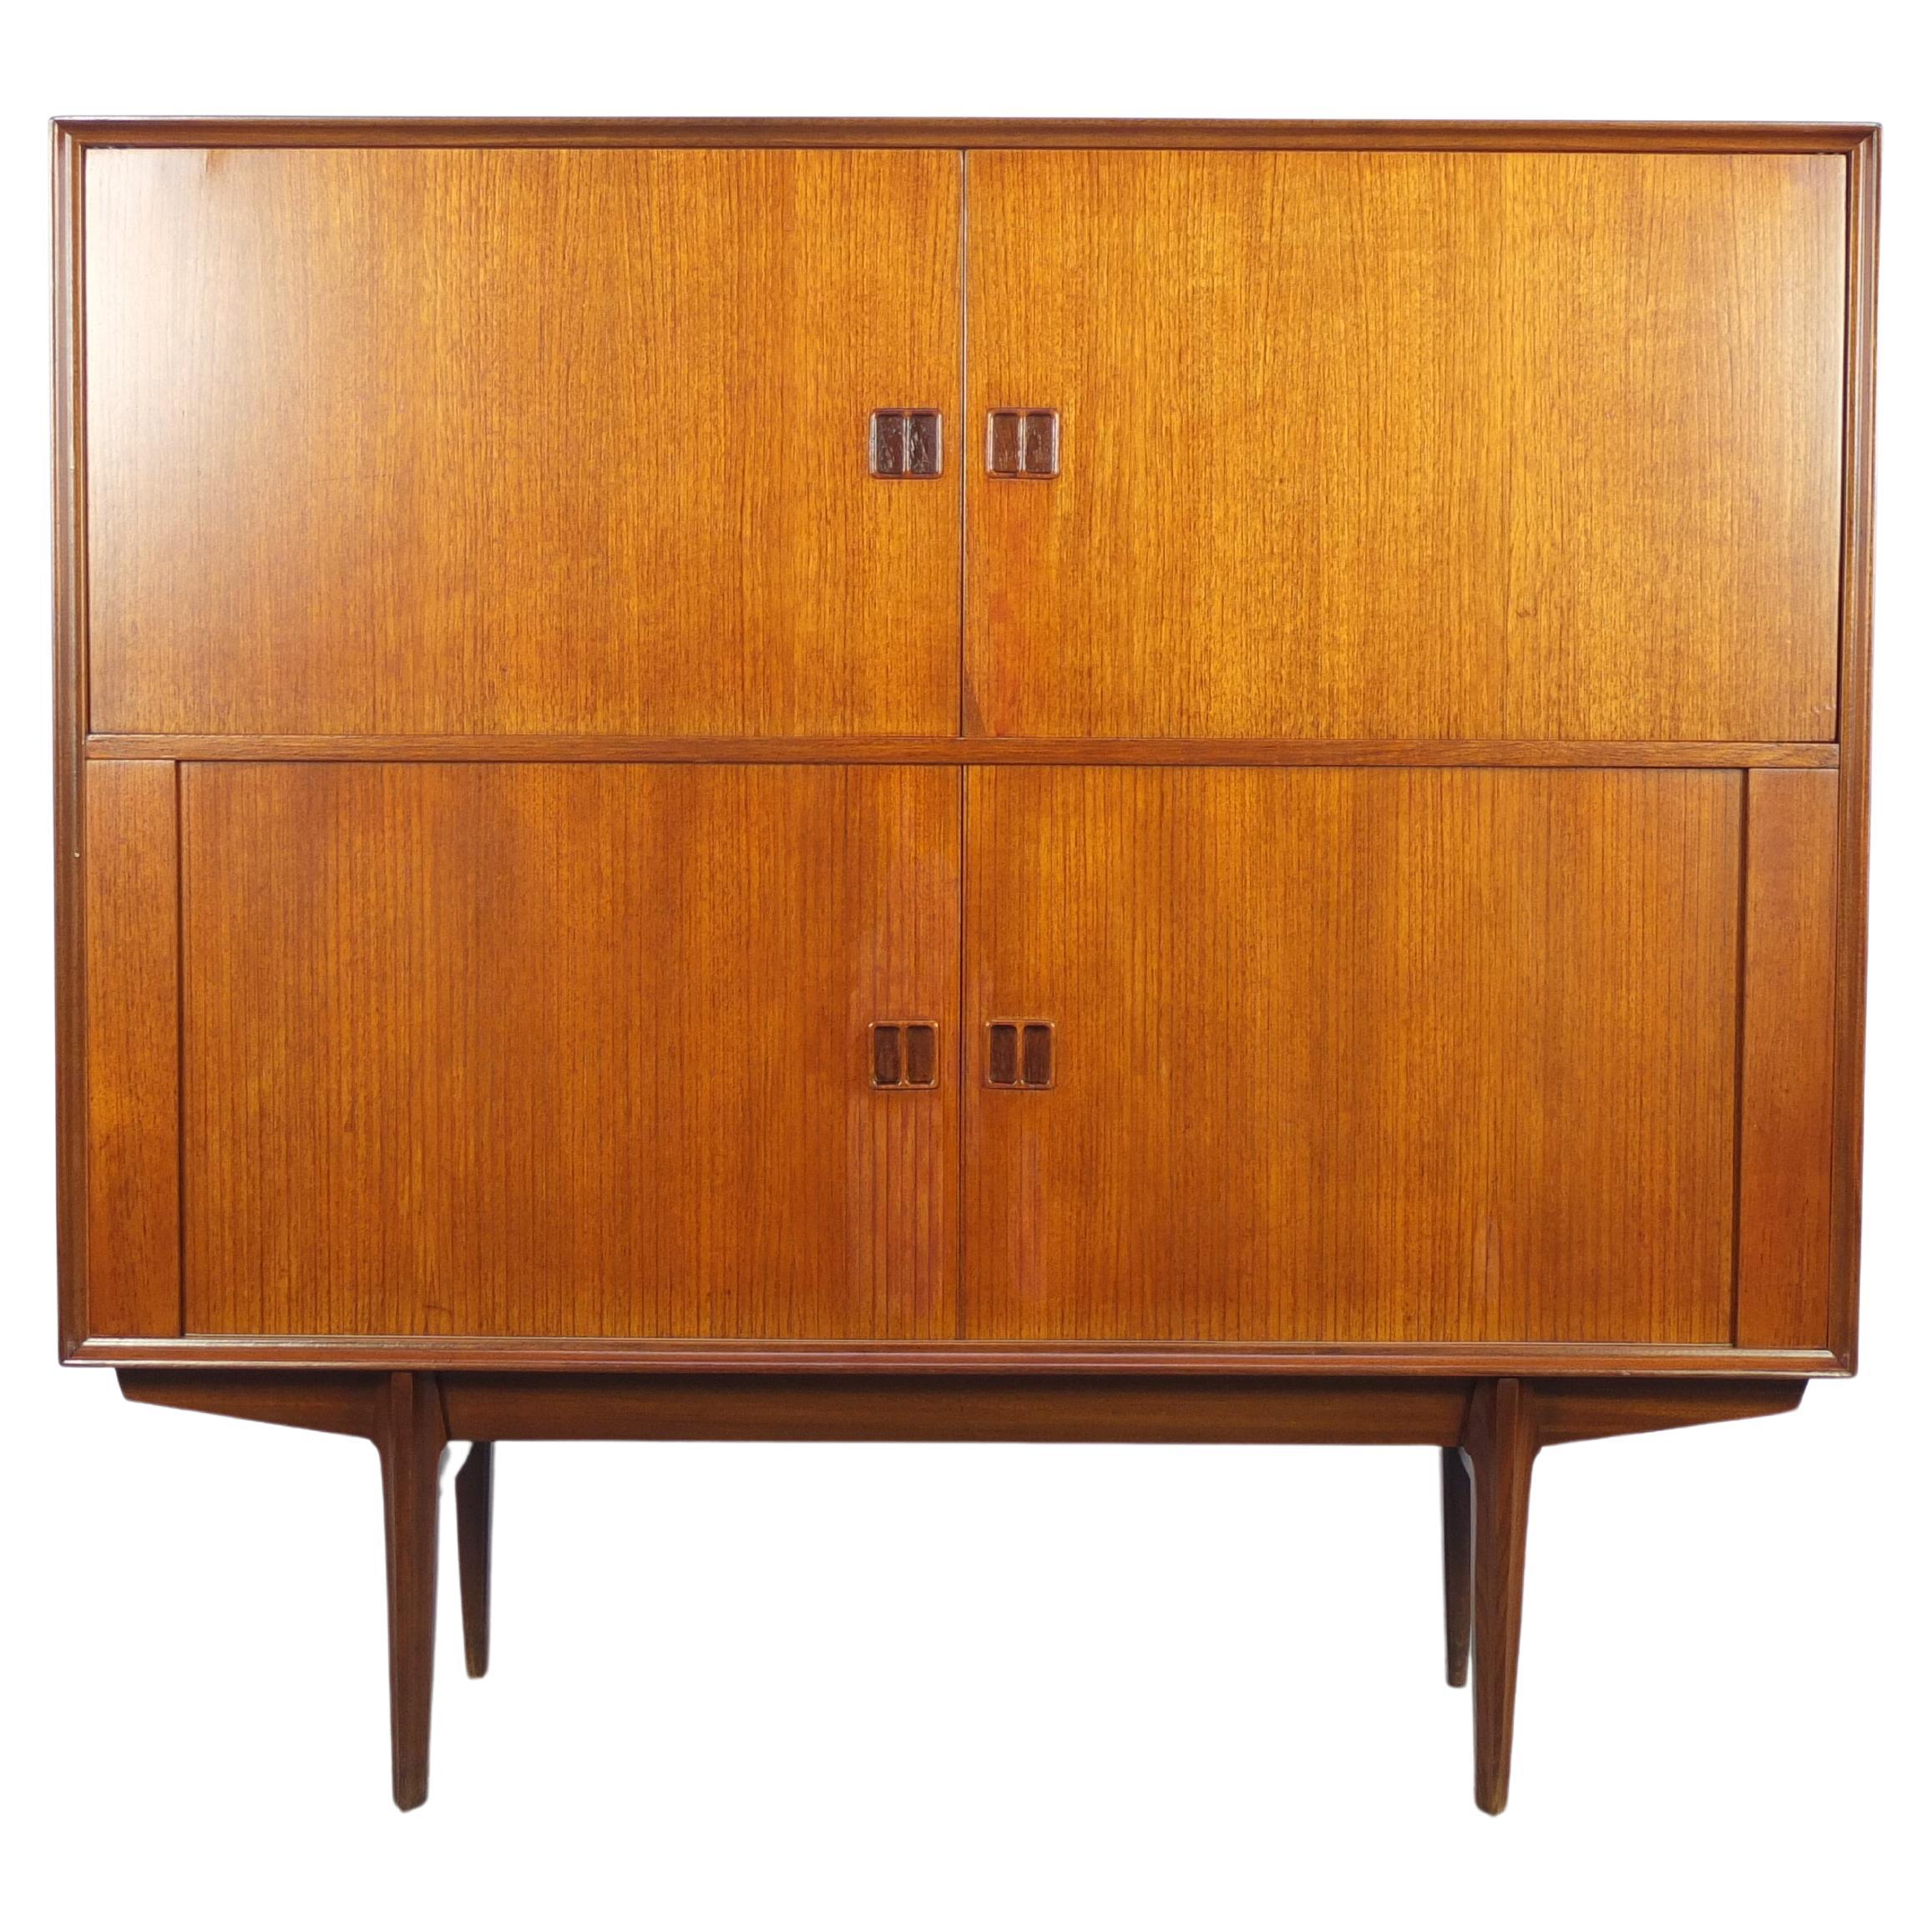 Teak Bar Cabinet with Tambour Doors by Oswald Vermaercke for V-Form, 1960s